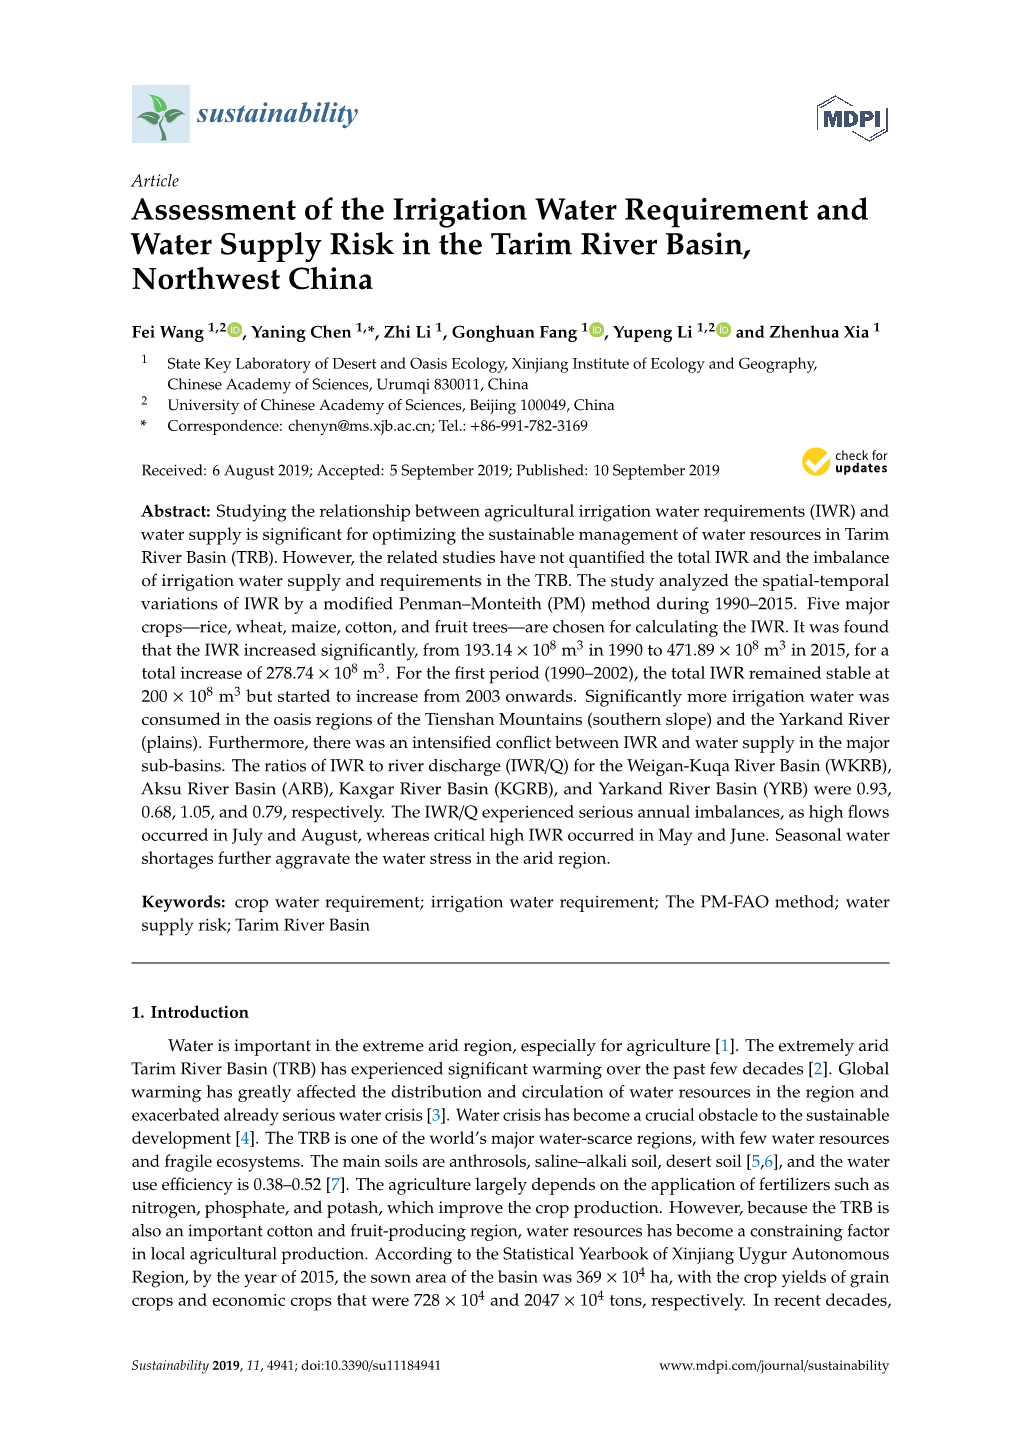 Assessment of the Irrigation Water Requirement and Water Supply Risk in the Tarim River Basin, Northwest China